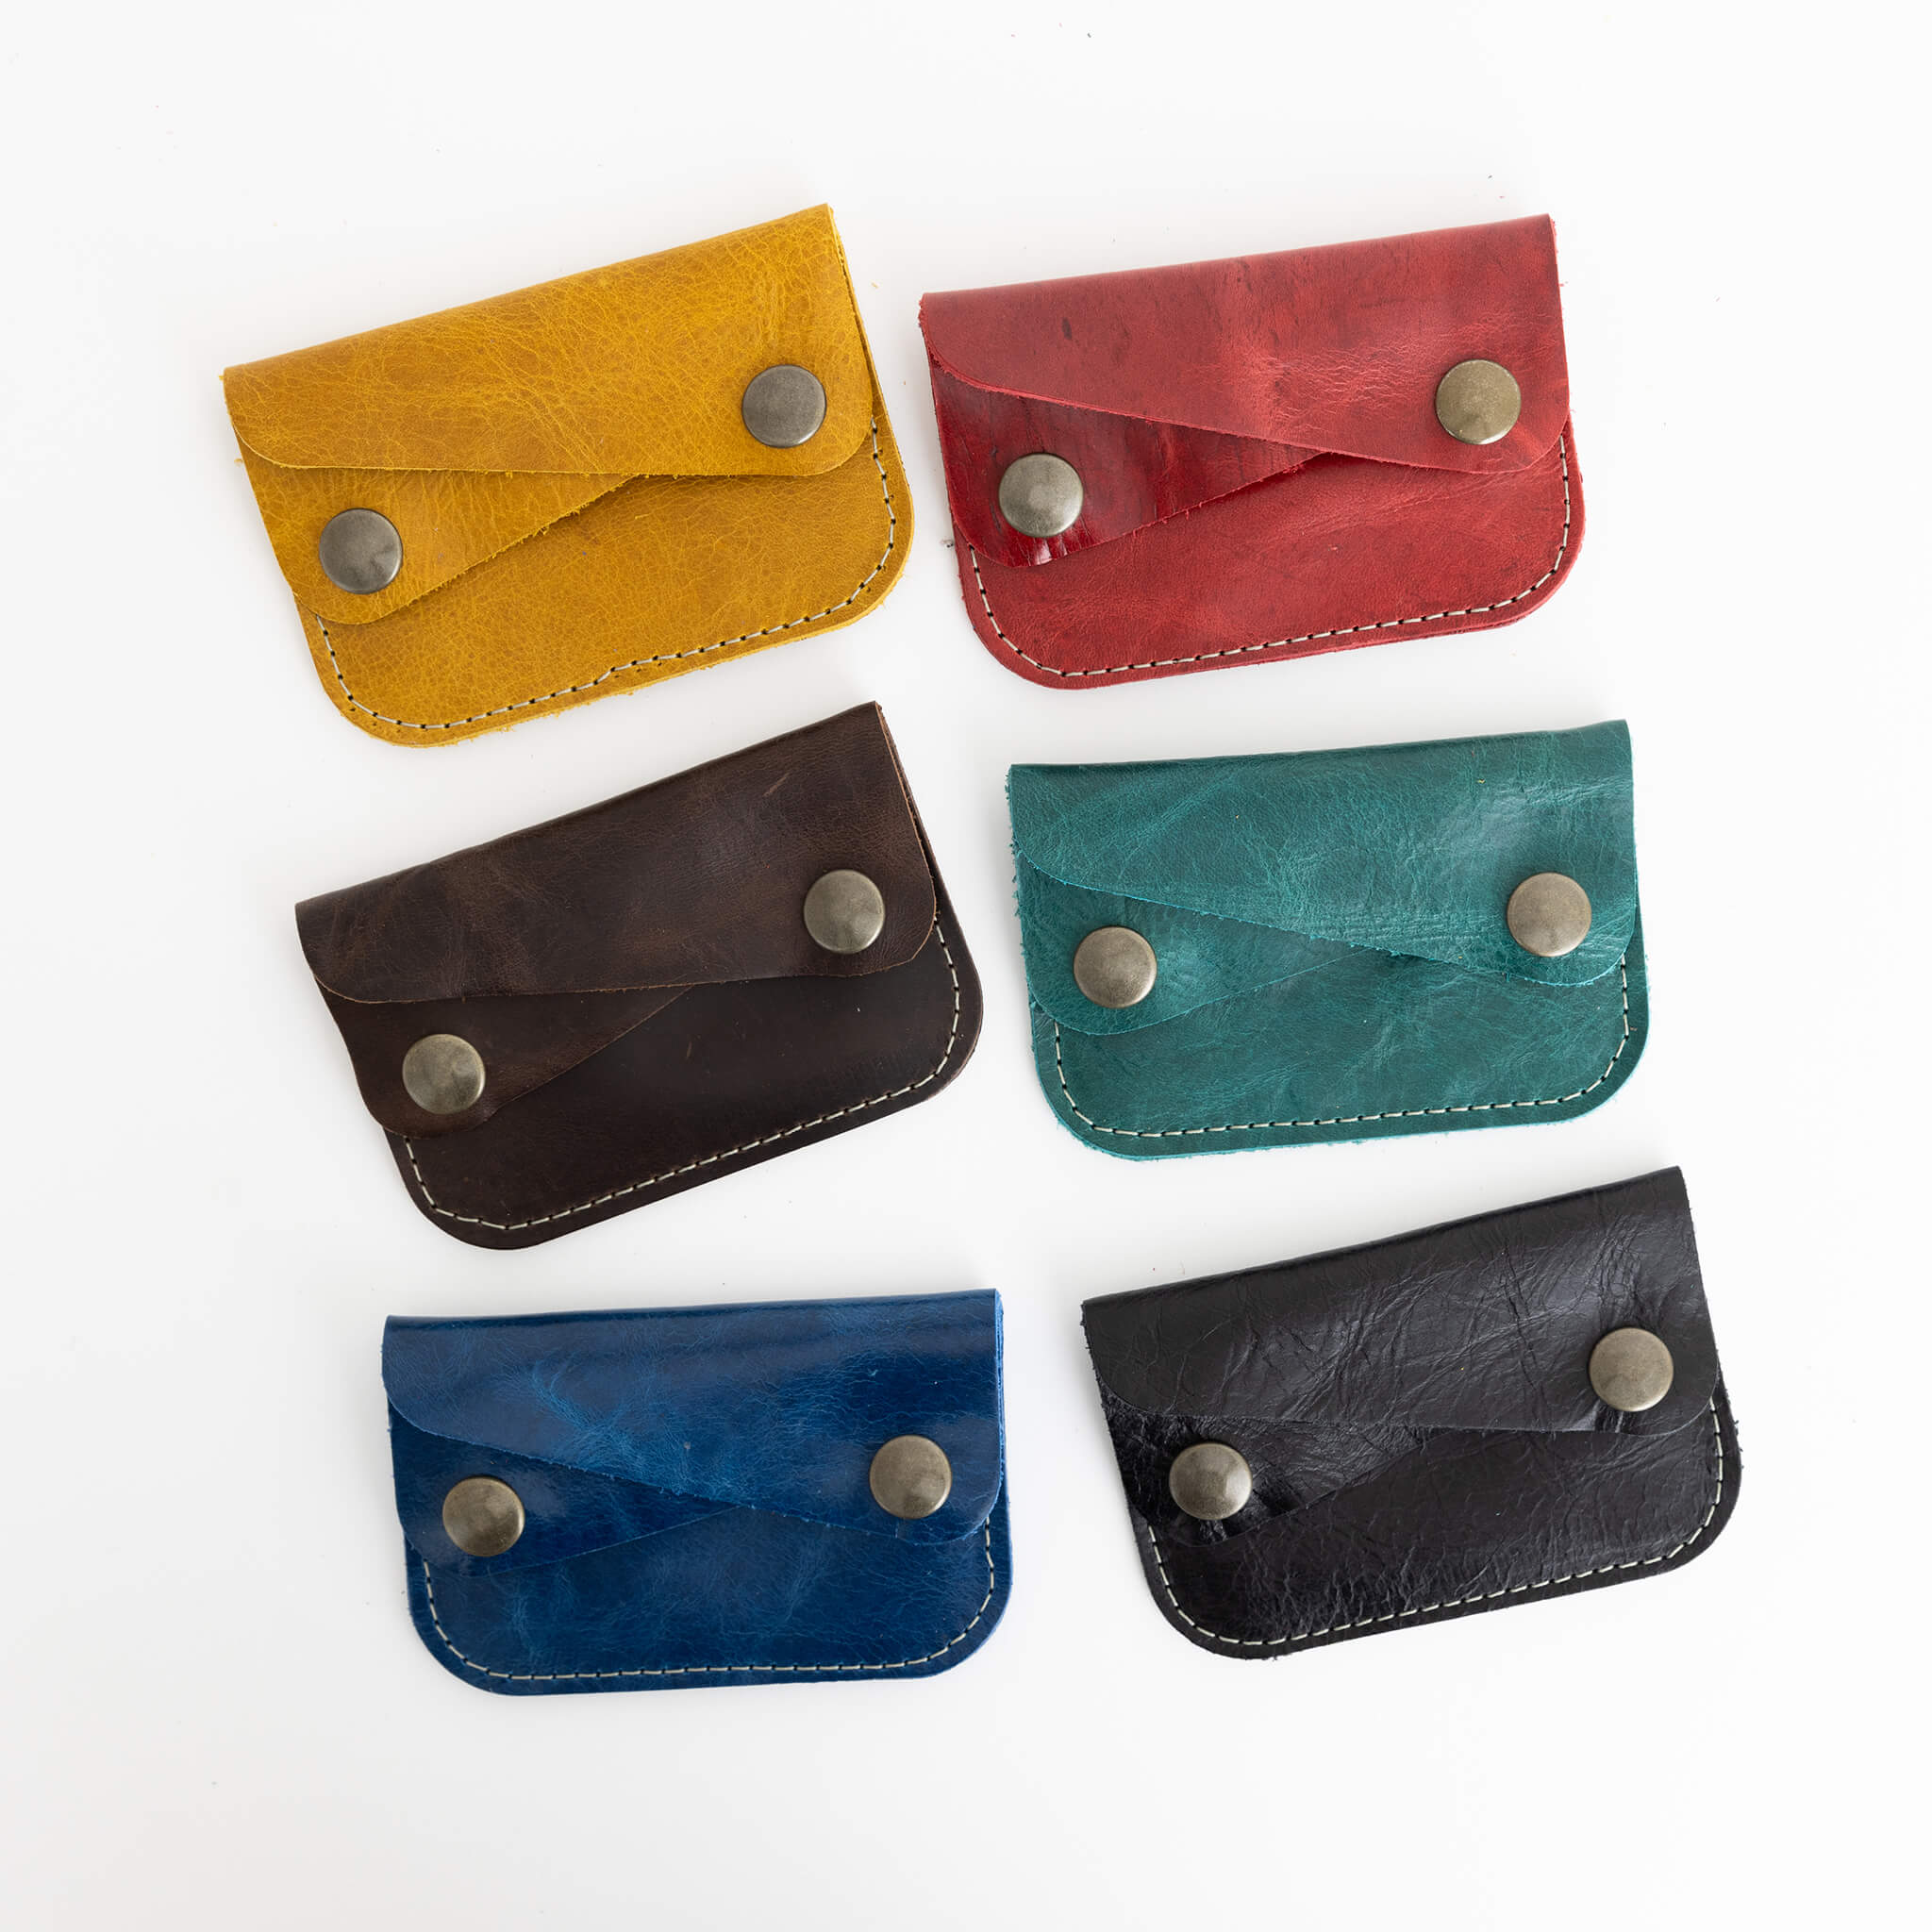 river card wallet - unisex double snap - handmade leather - group view